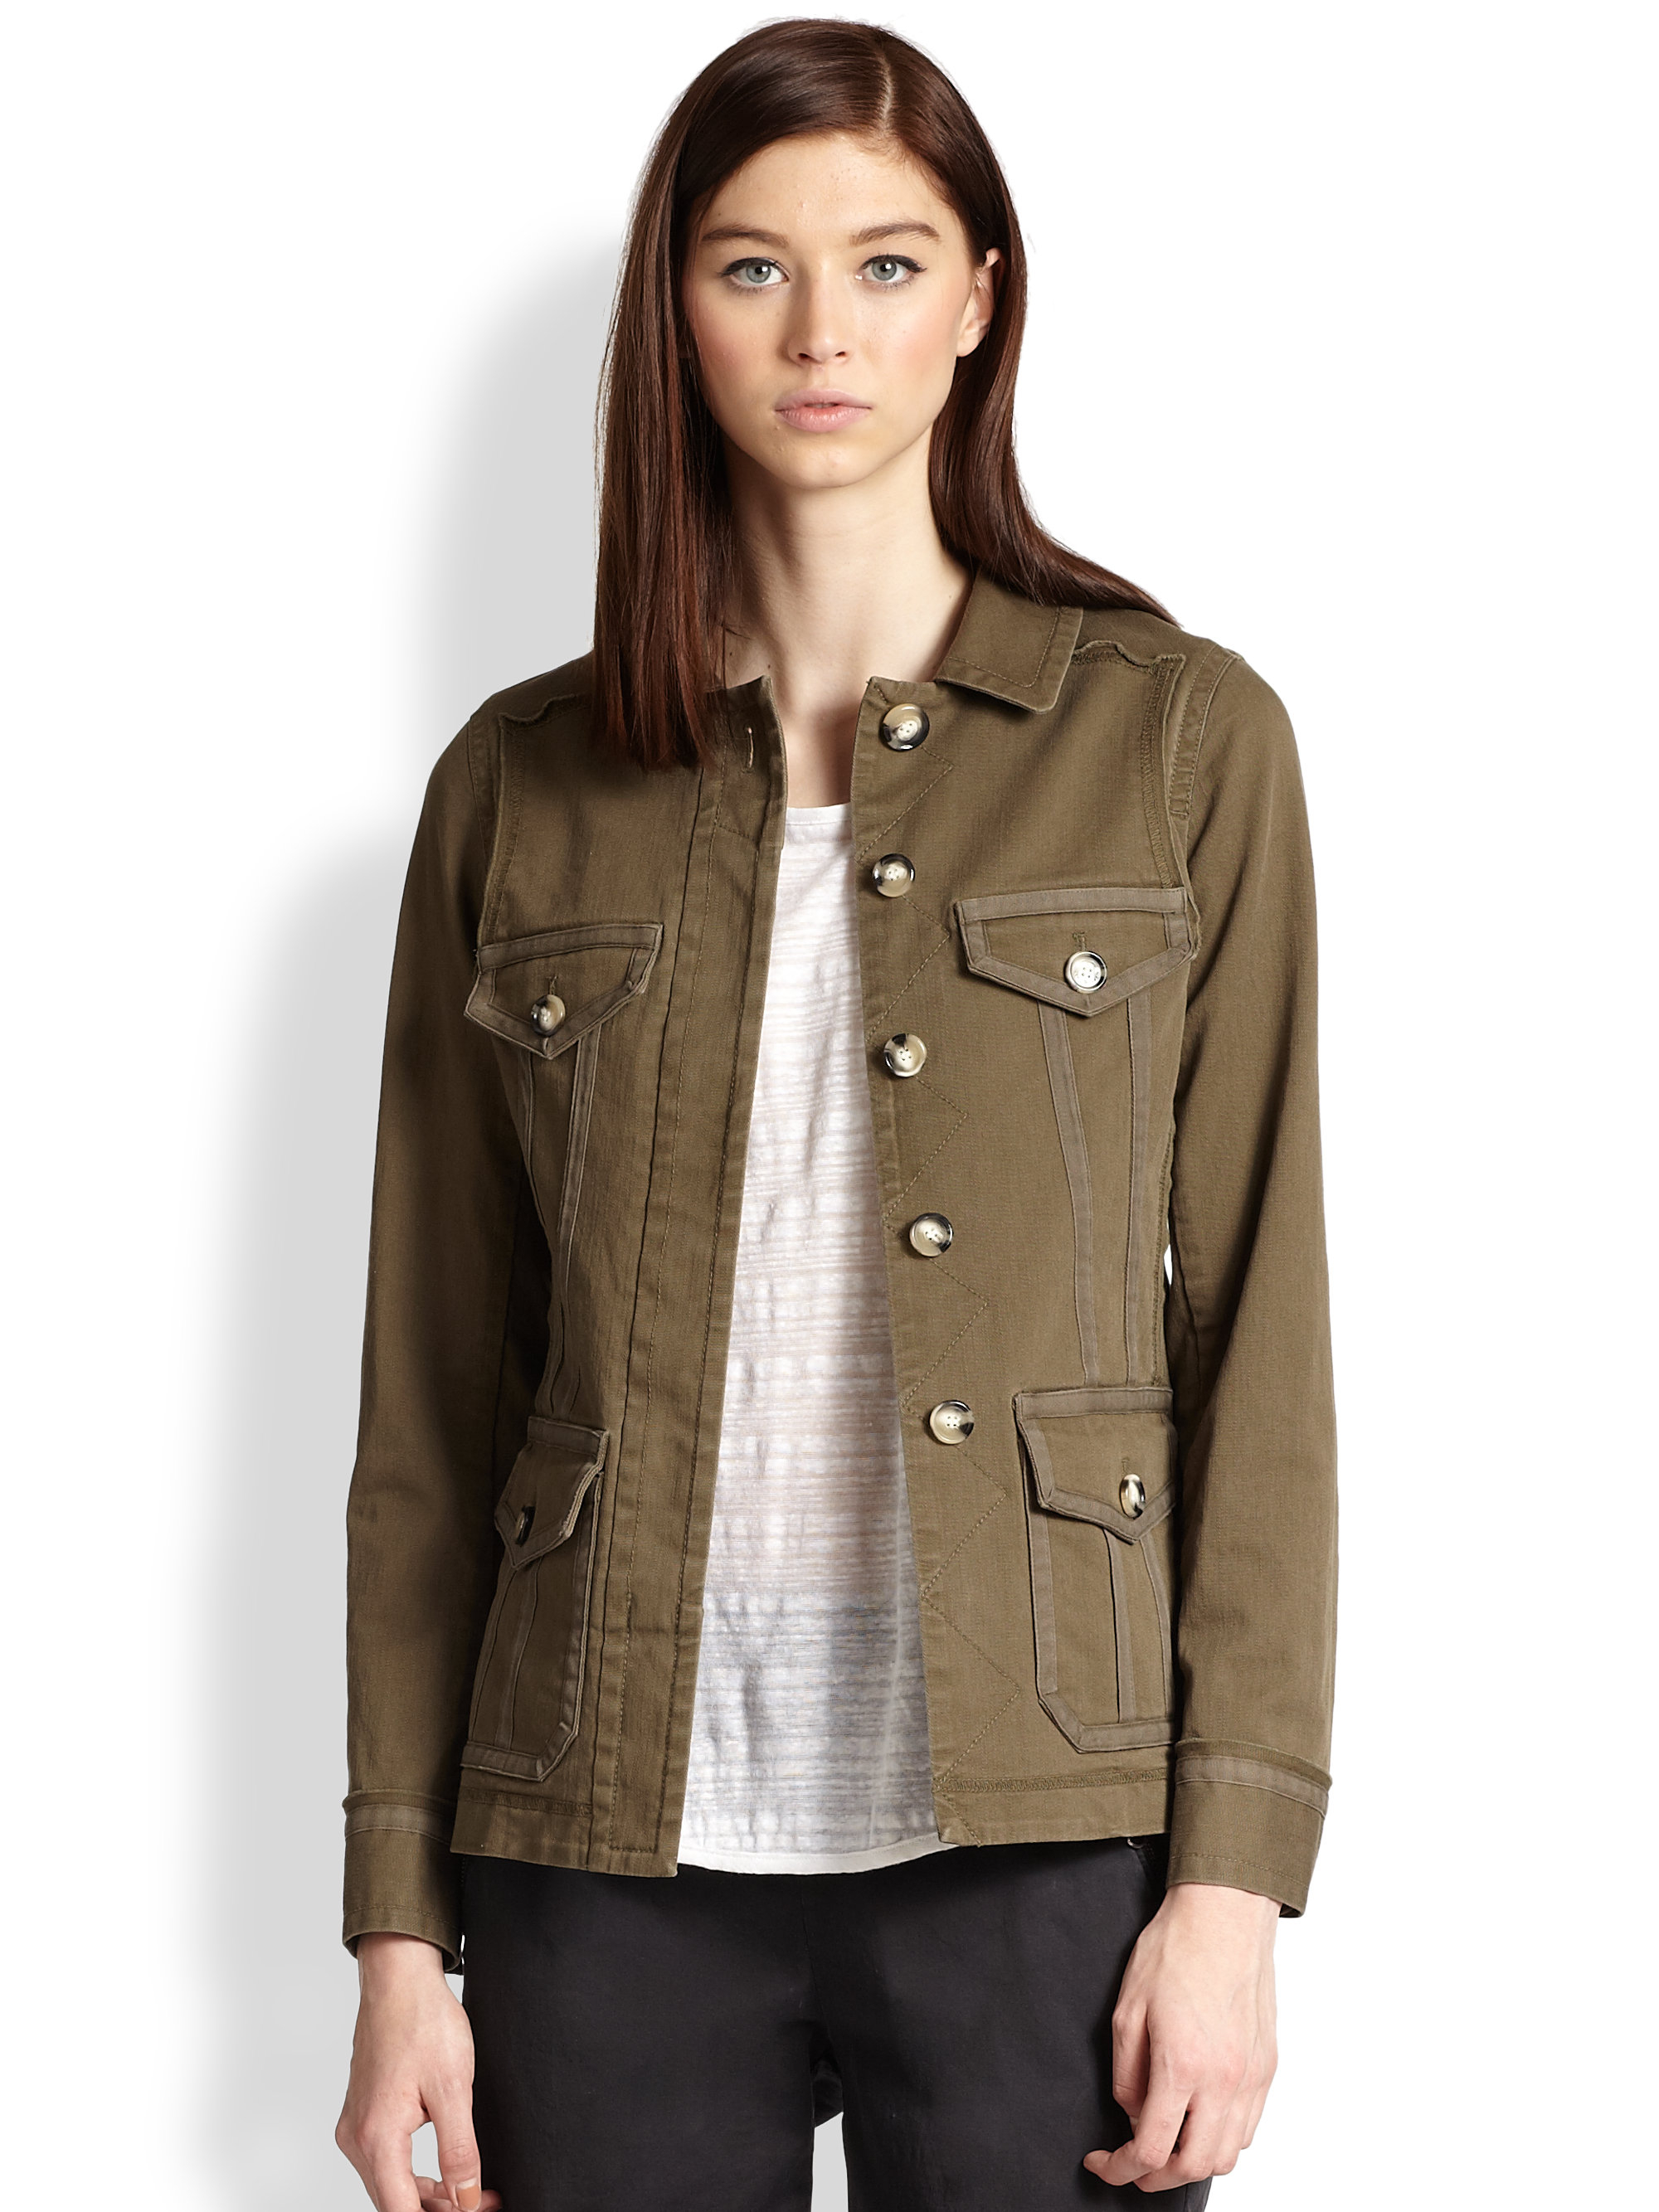 Lyst - Marc By Marc Jacobs Zeta Stretch Cotton Army Jacket in Natural